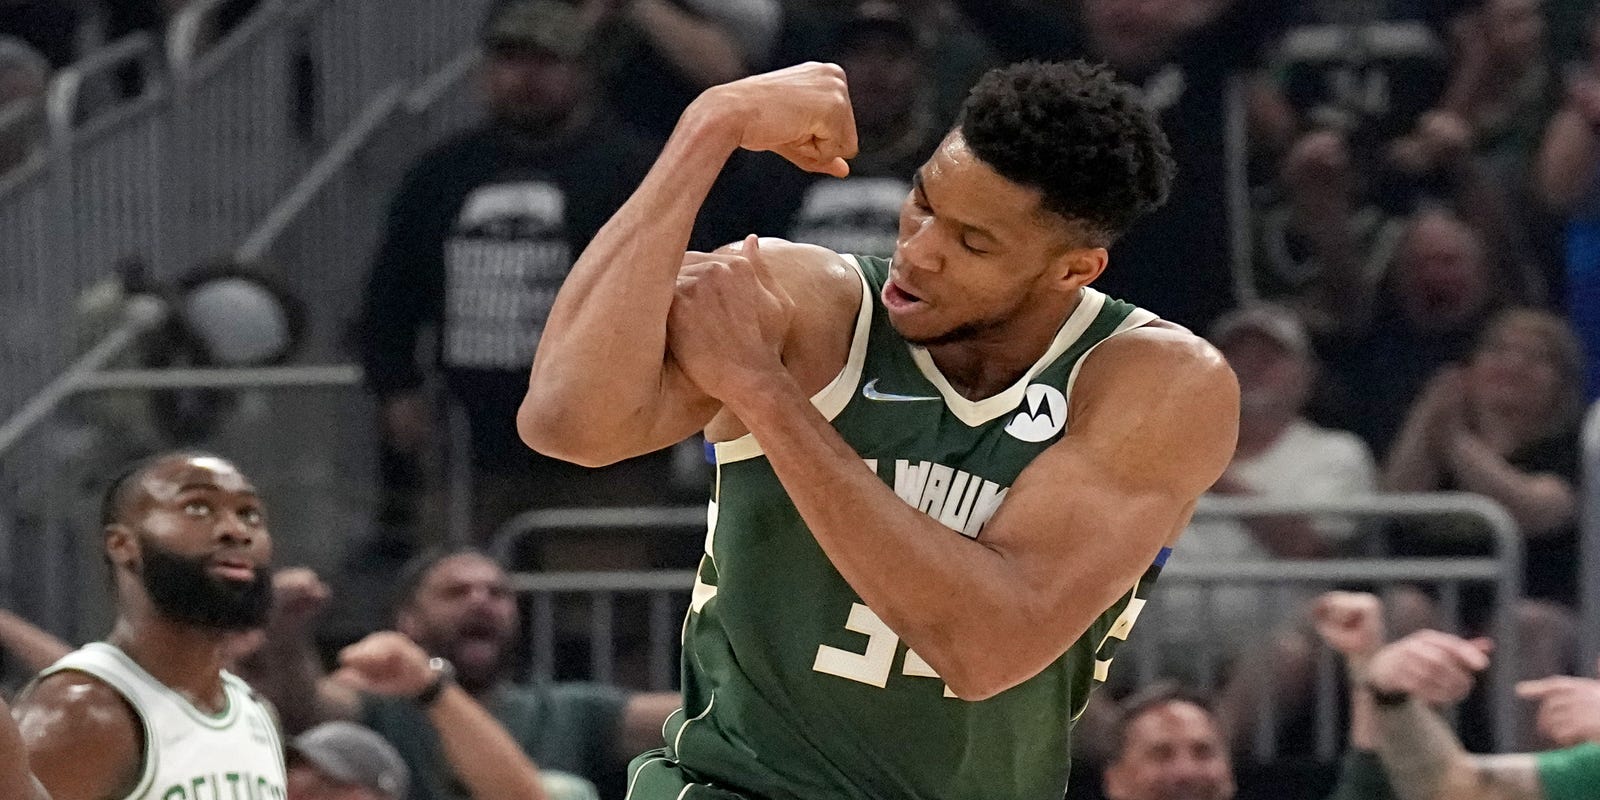 Giannis Antetokounmpo led the Bucks to an Opening Night victory over the 76ers